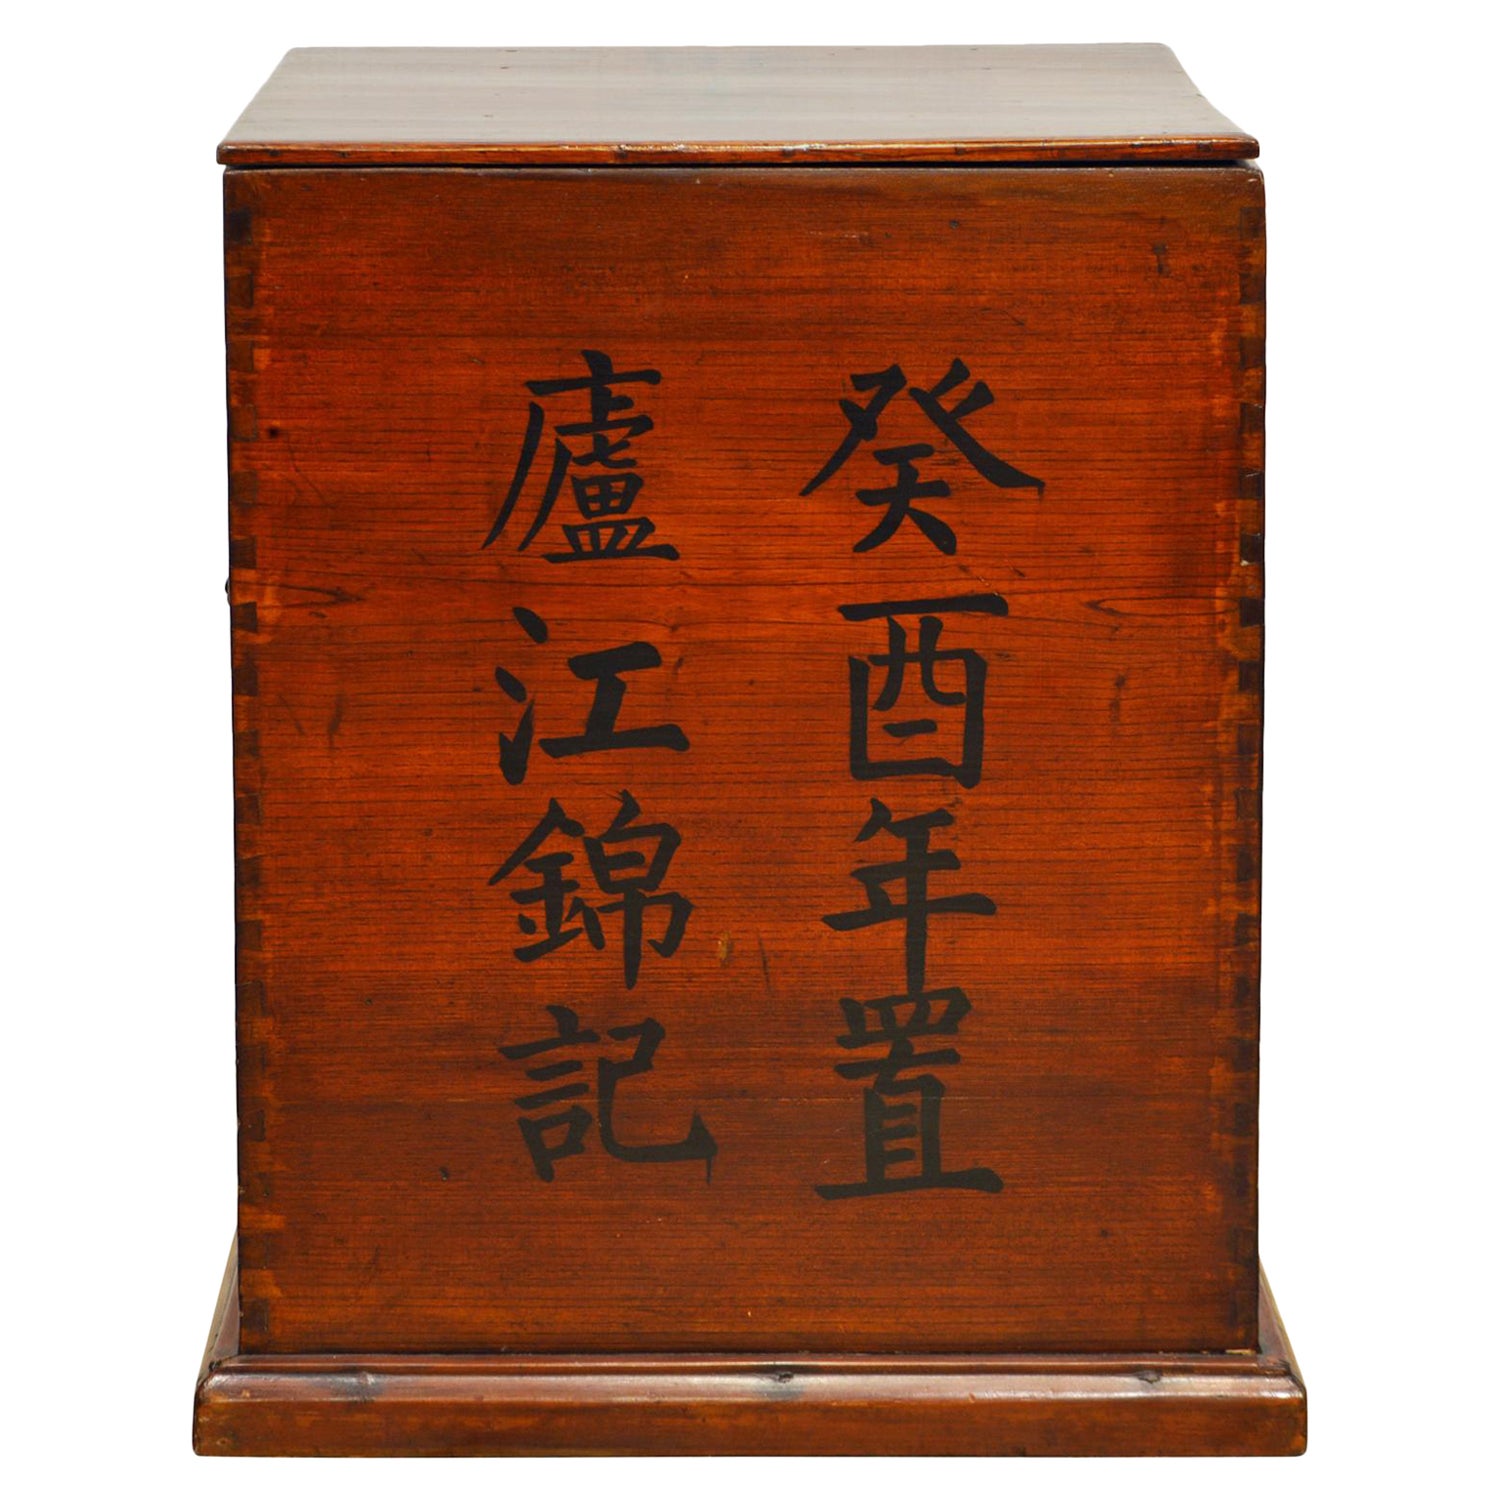 Early 20th Century Japanese Inscribed and Dovetailed Merchant's Storage Box